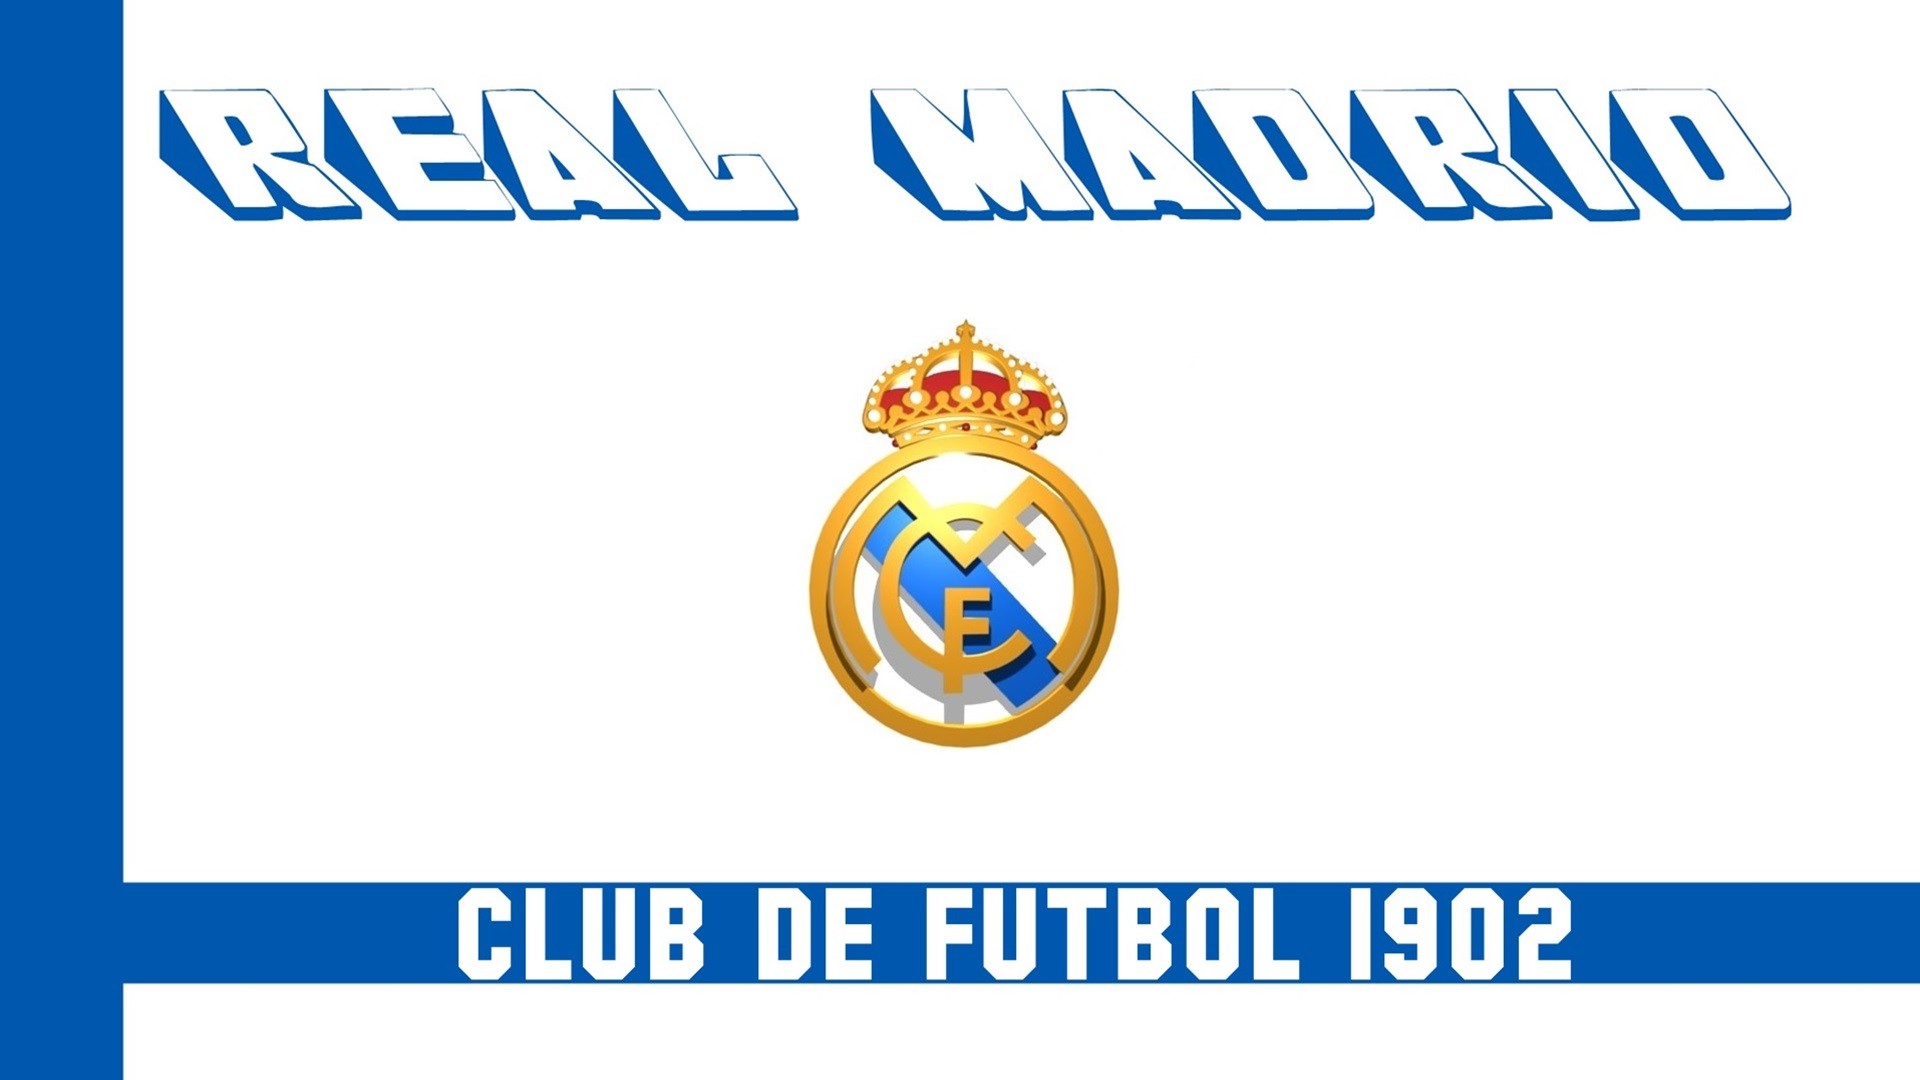 Real Madrid, Soccer Clubs, Sports, Soccer, Spain Wallpaper